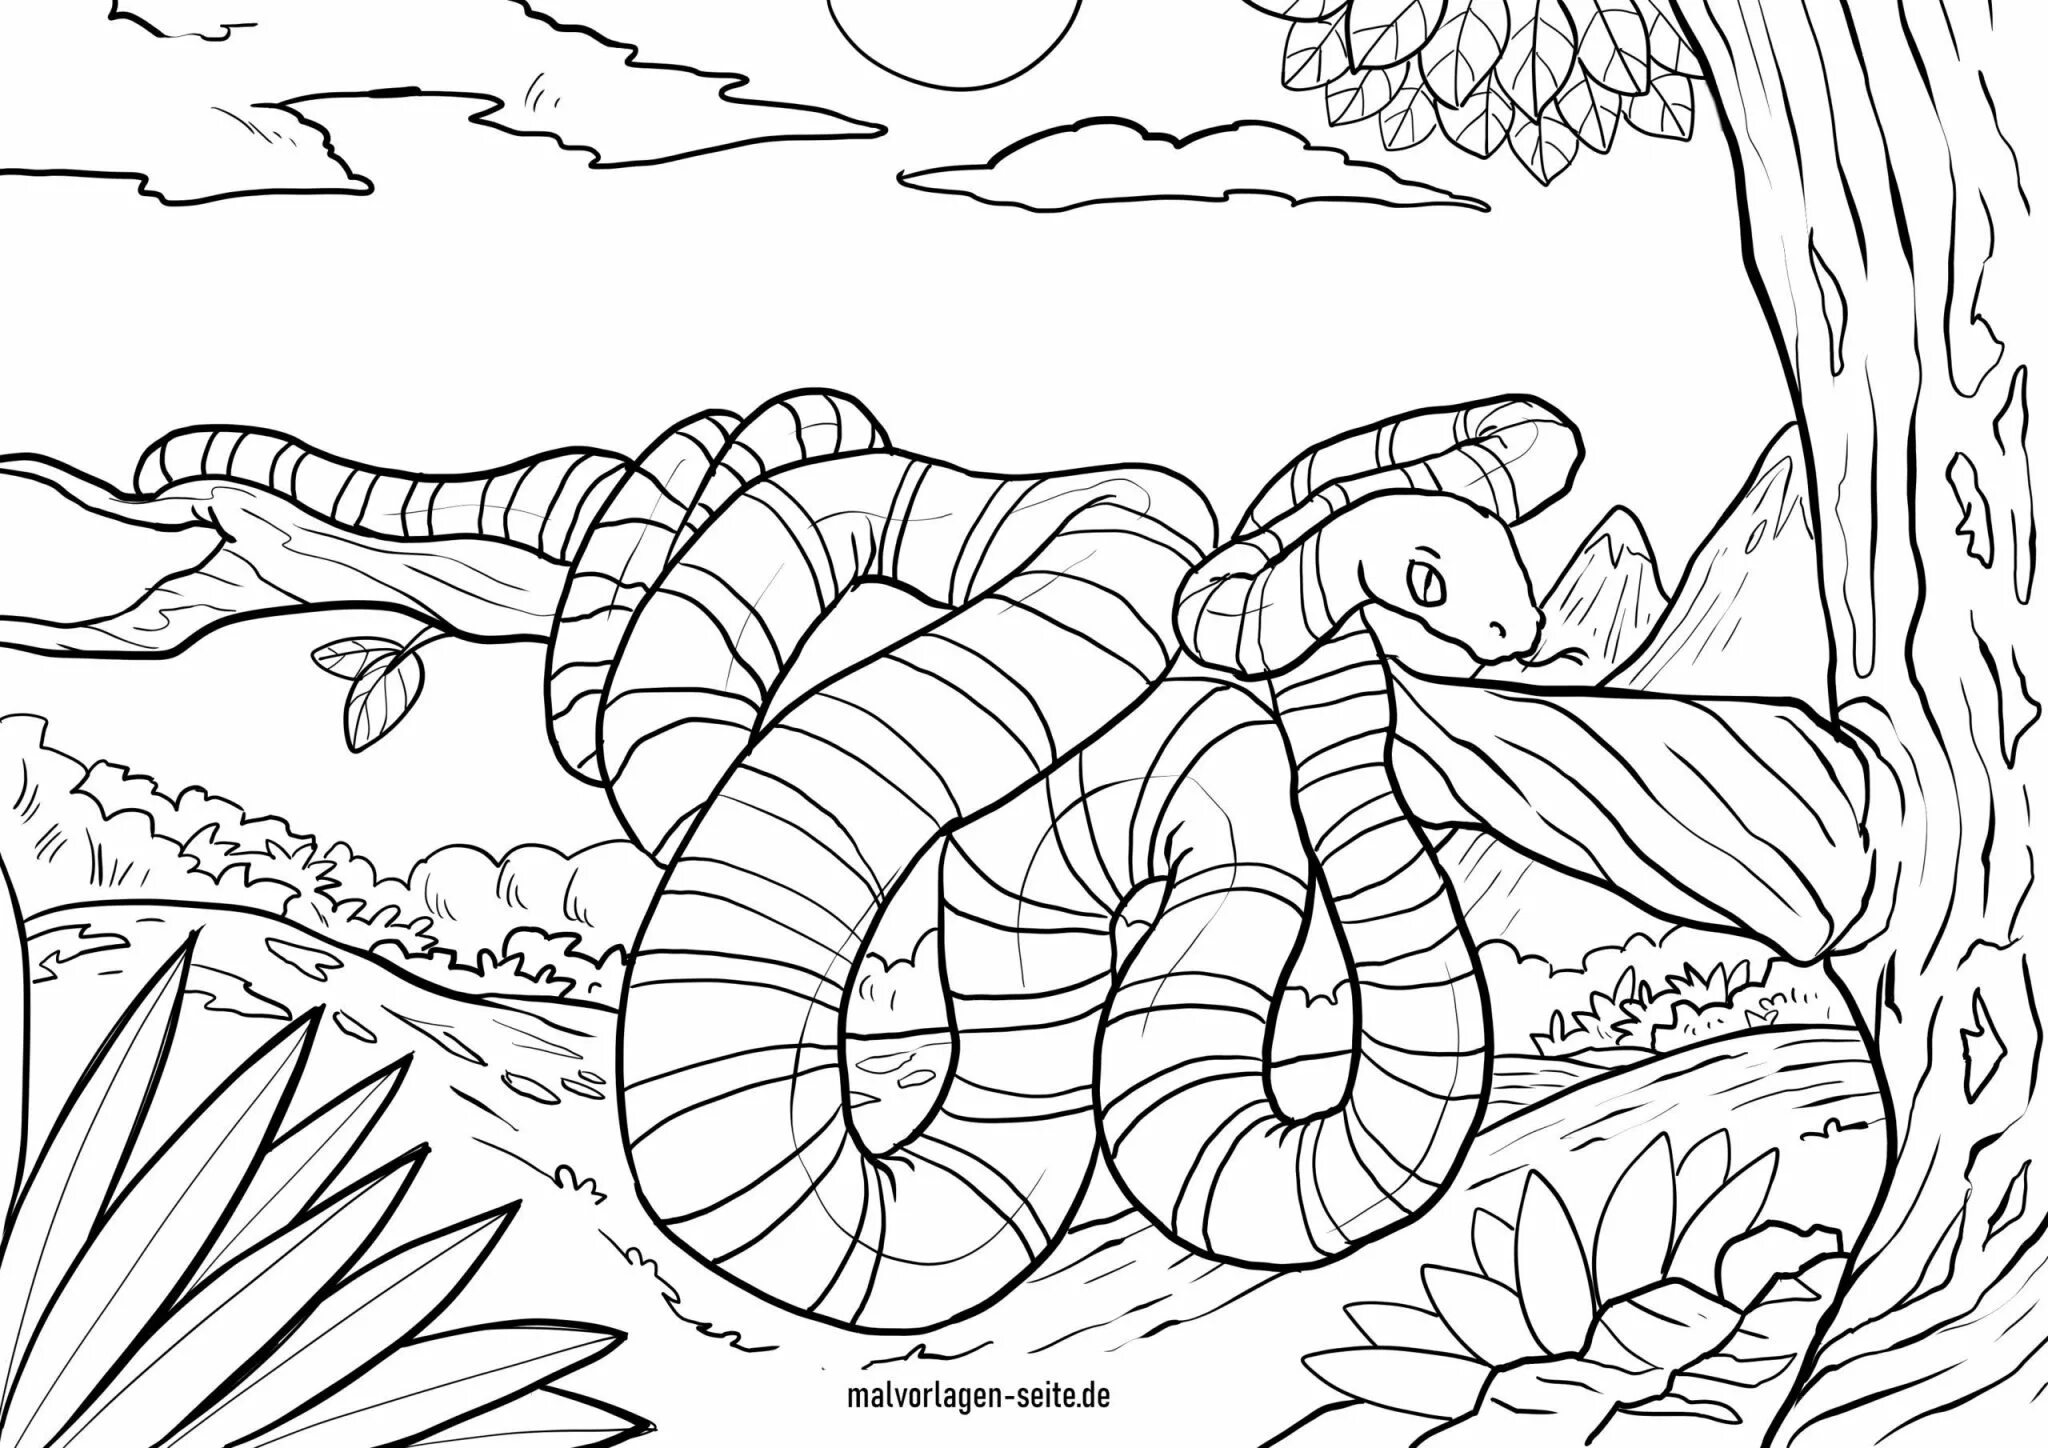 Coloring page charming kaa